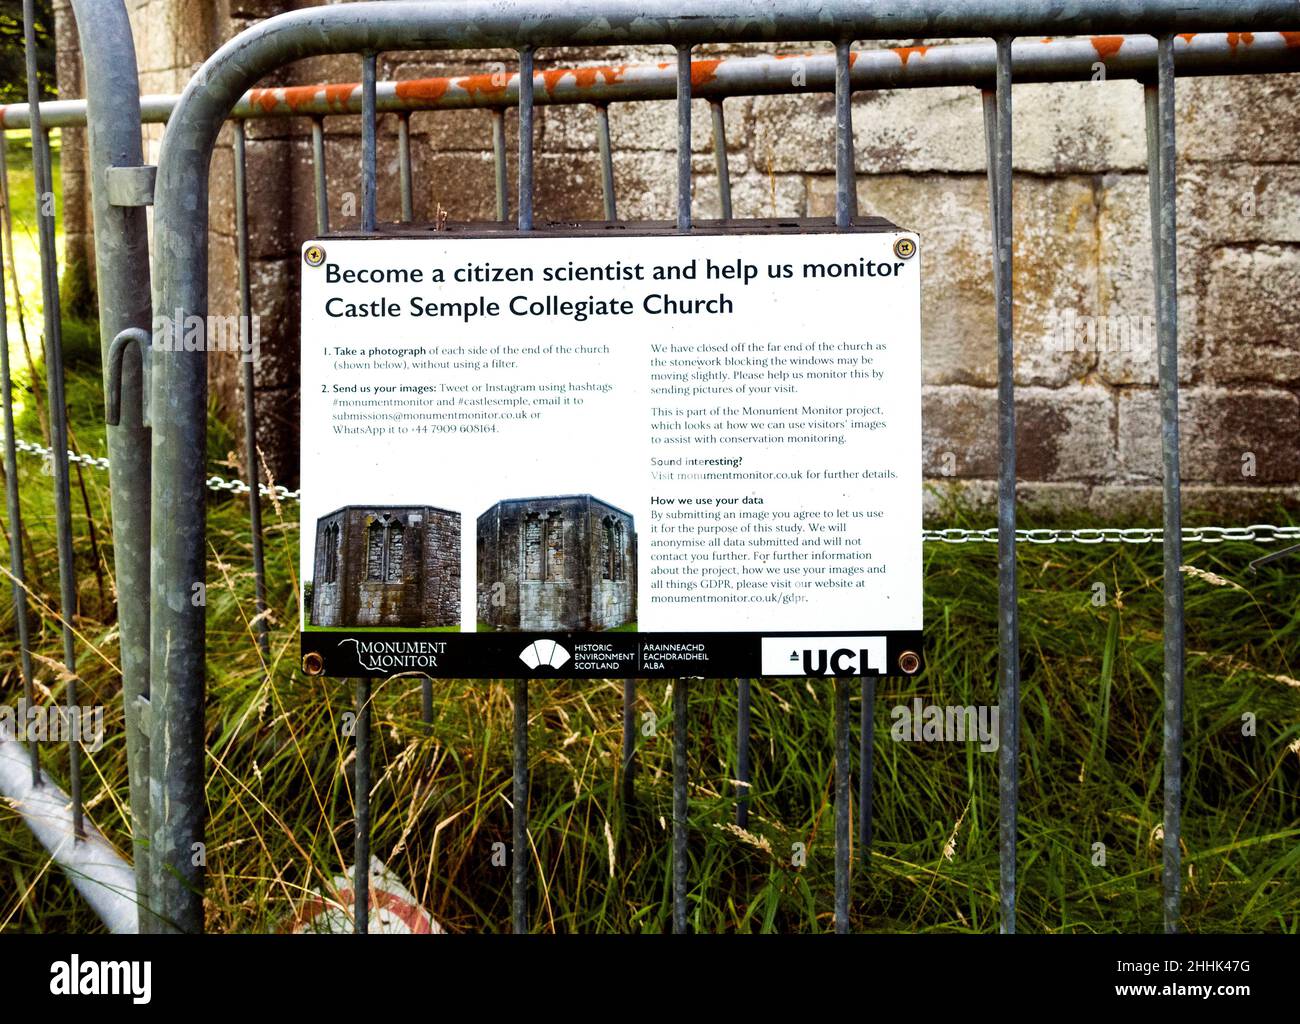 Monument Monitor sign affixed to a barrier outside Castle Semple Collegiate Church, requesting visitors to photograph both ends of the building. Stock Photo